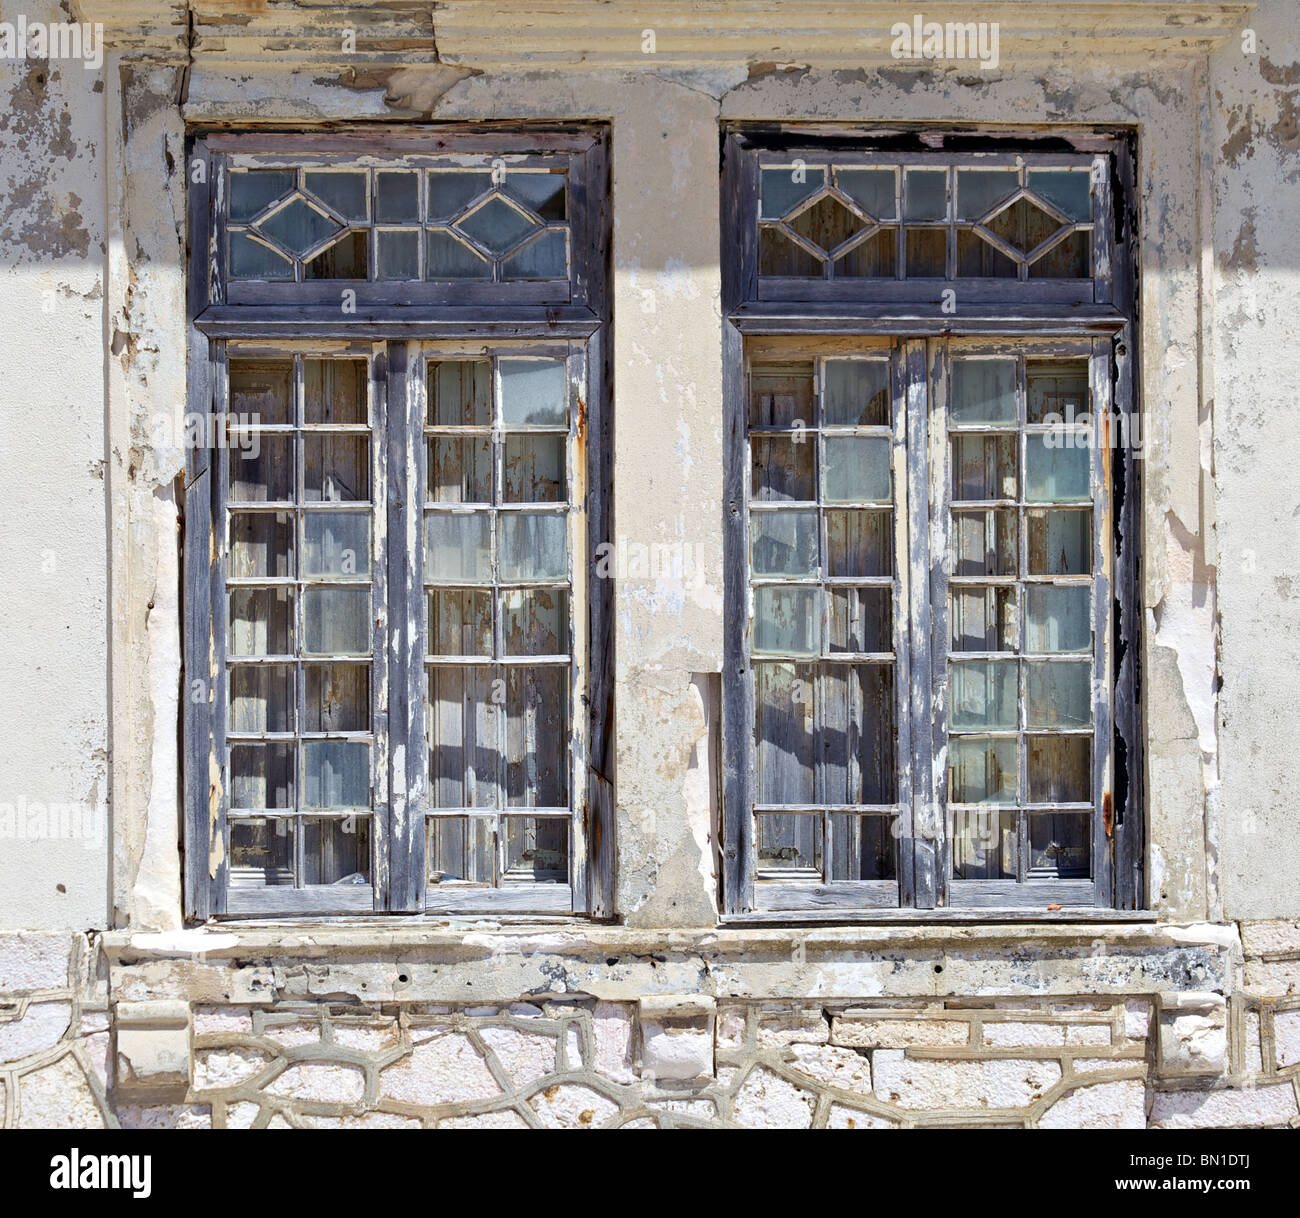 Broken Rustic Faded Painted Wood Windows of Old World Europe Stock Photo